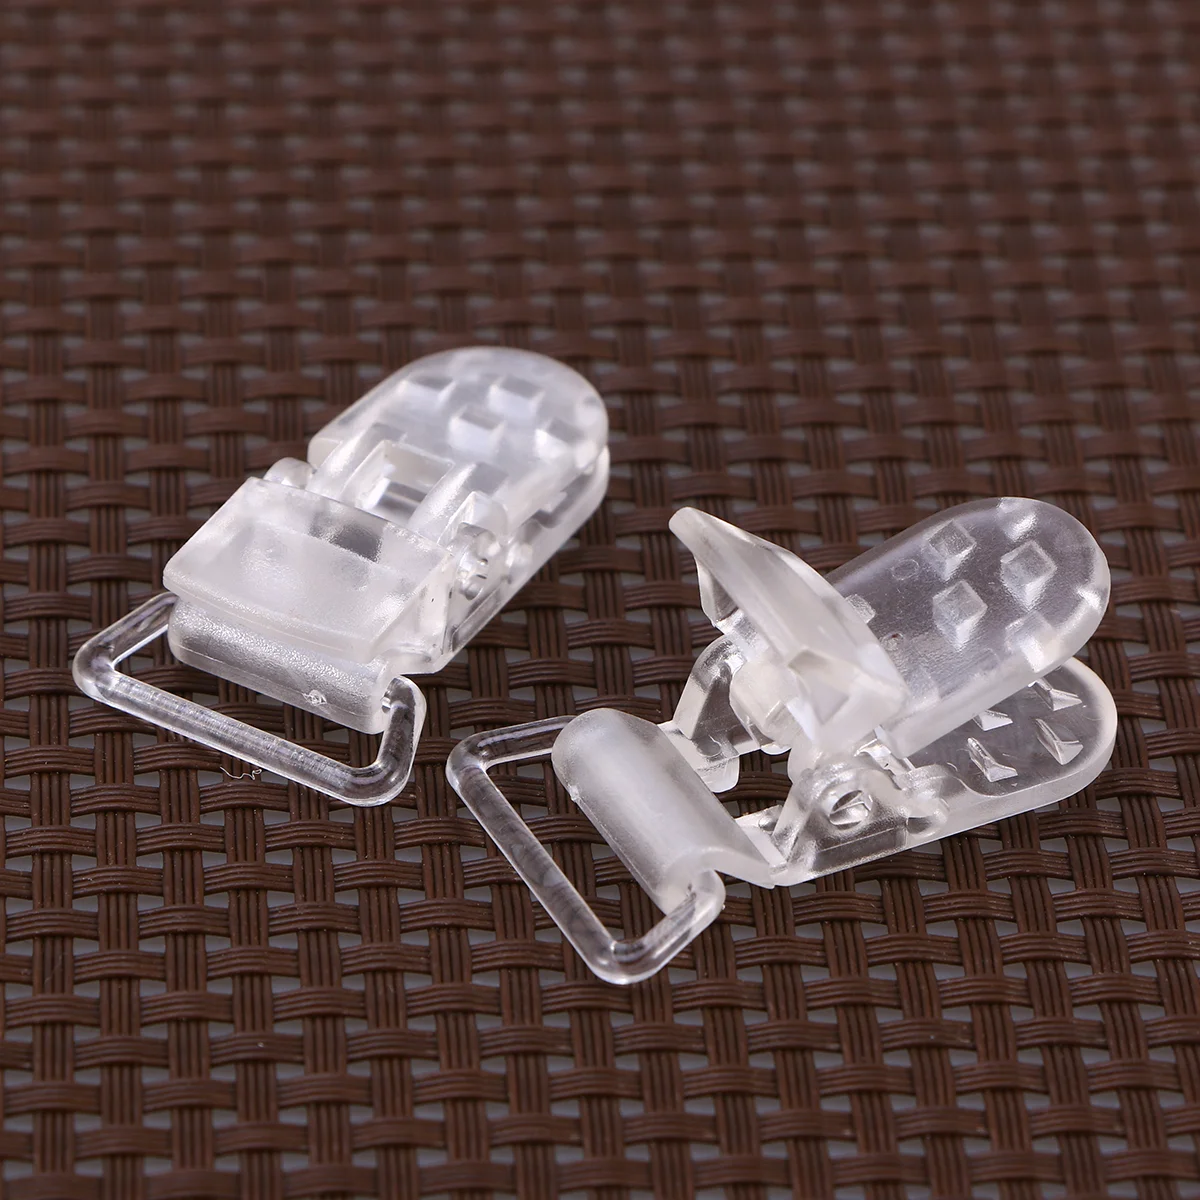 

25 Pieces Clear Silicone Pacifier Clips Suspender Snap Pacifier Holders with Gripping Suspender Clips with Gripping for